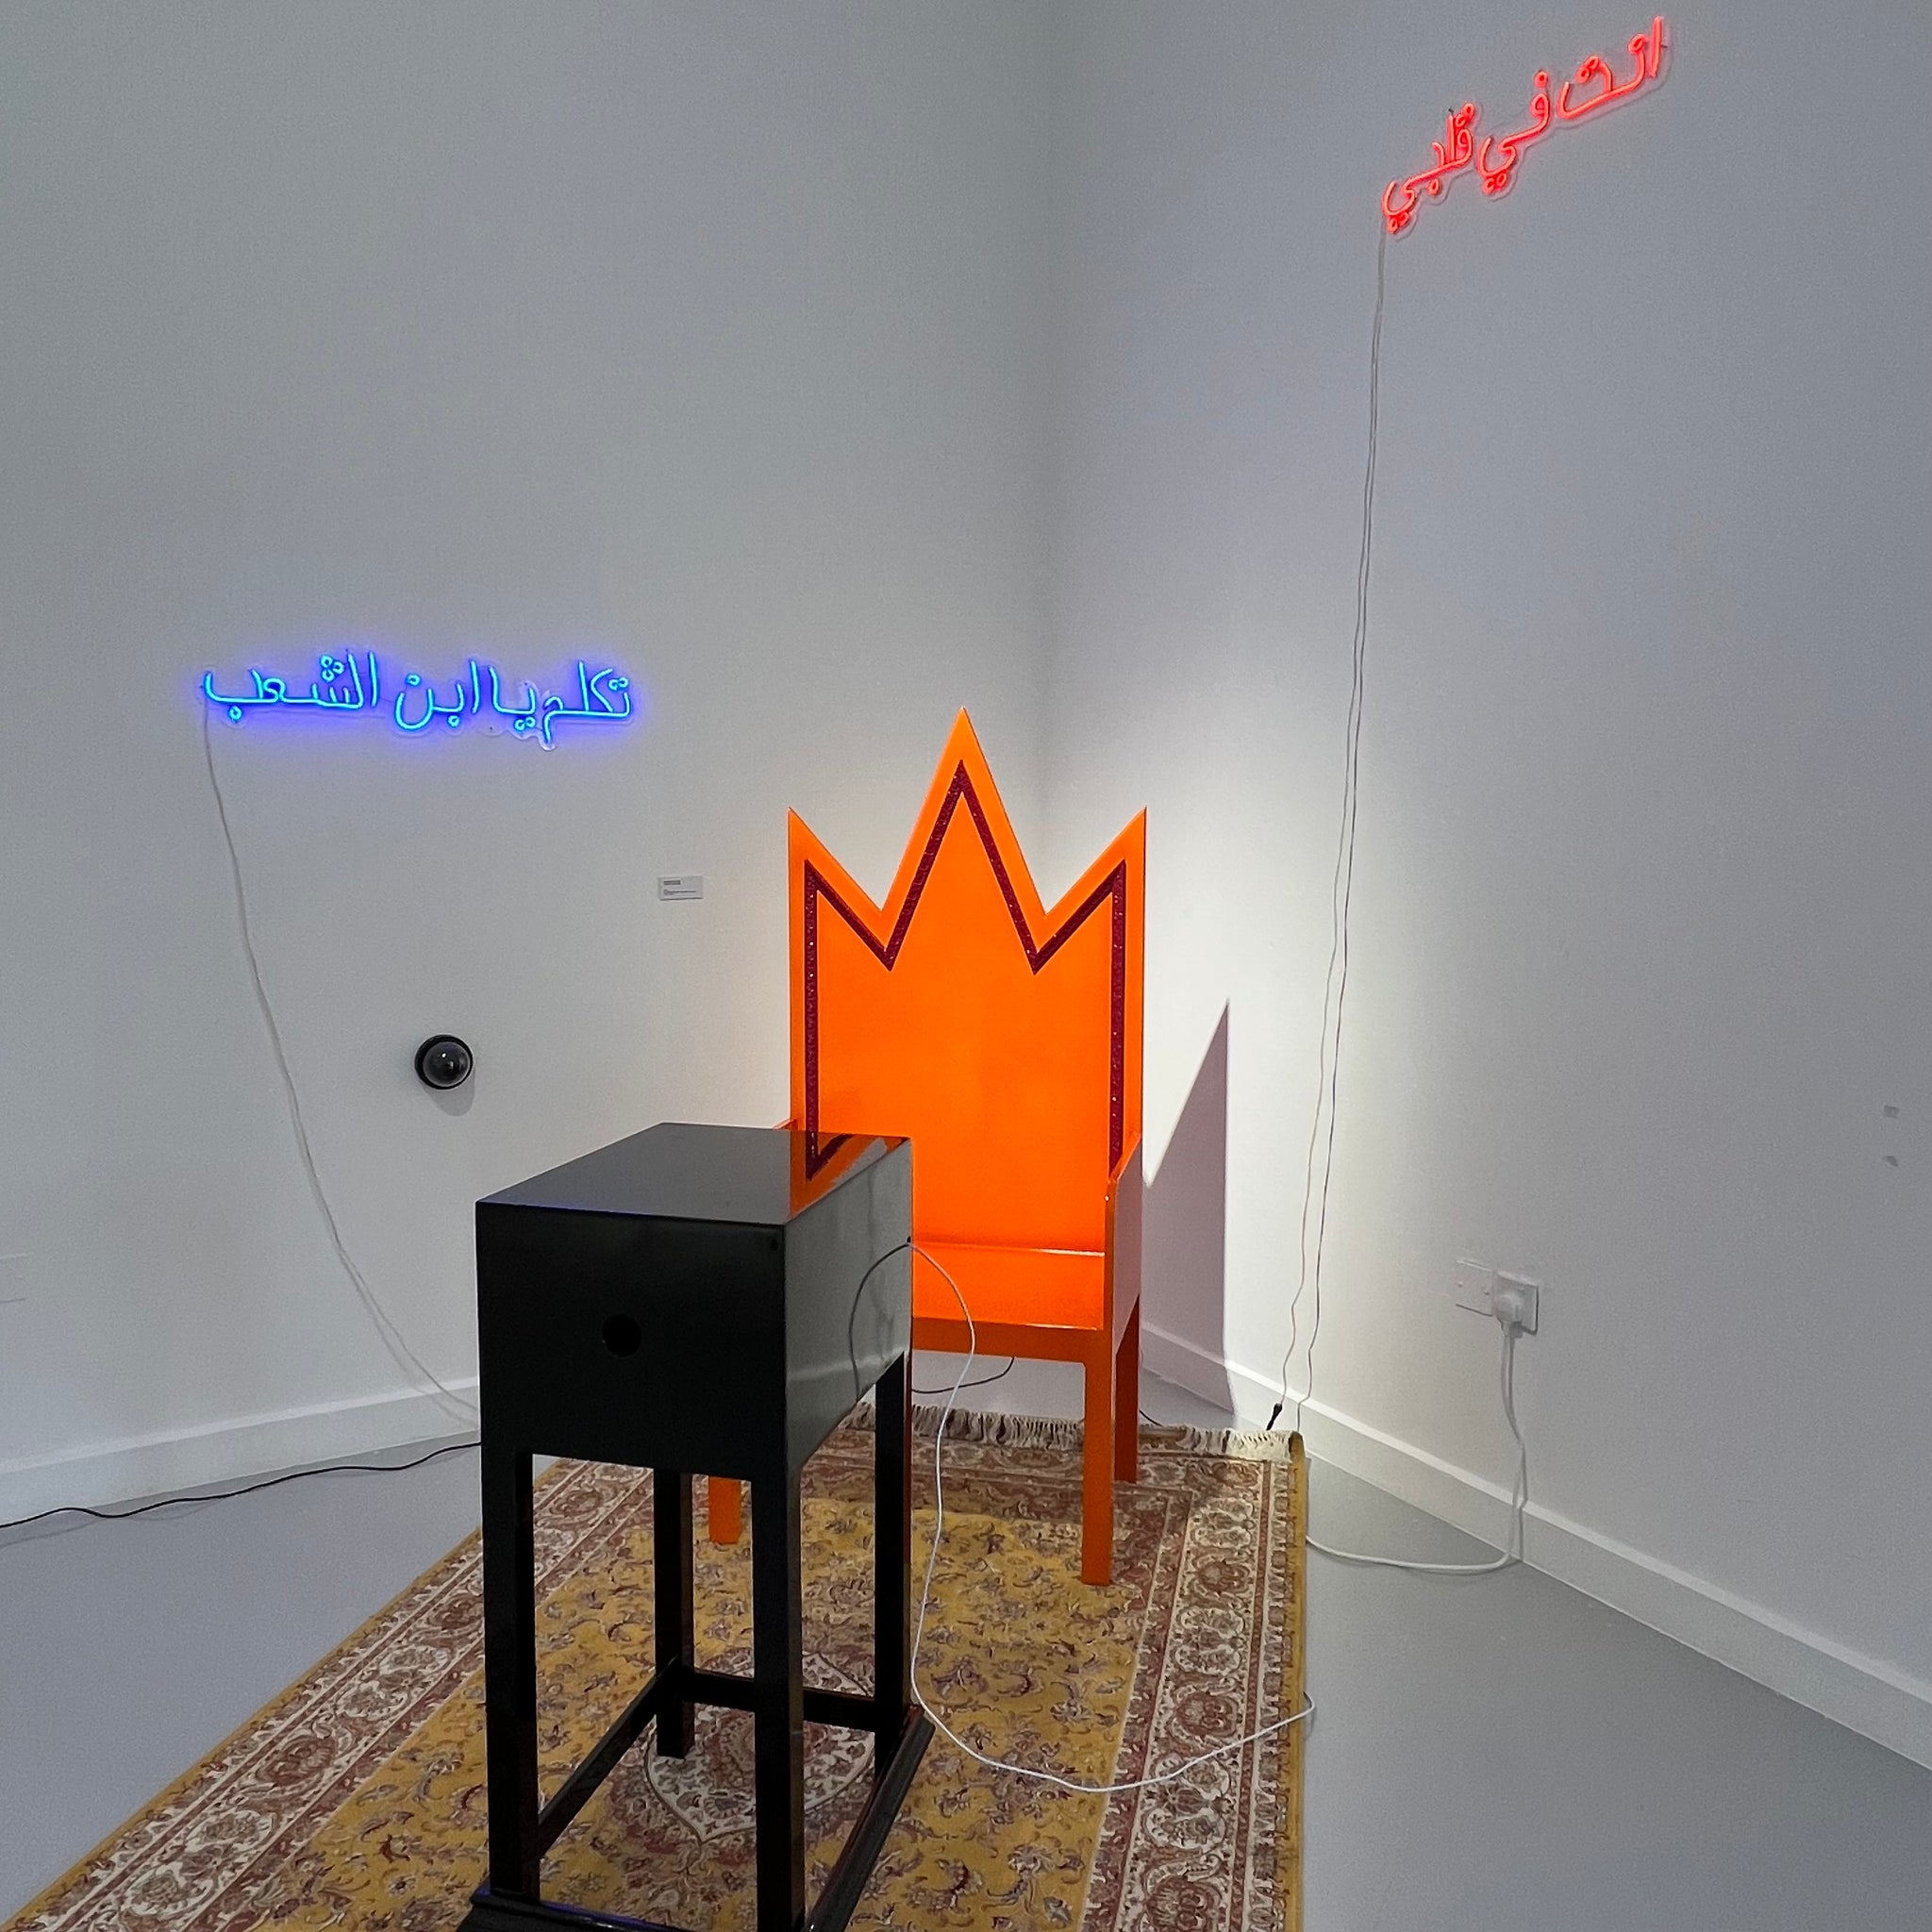 Sleep of the Just, 2022, installation [neon lights, custom chair, and found video, 10:22]